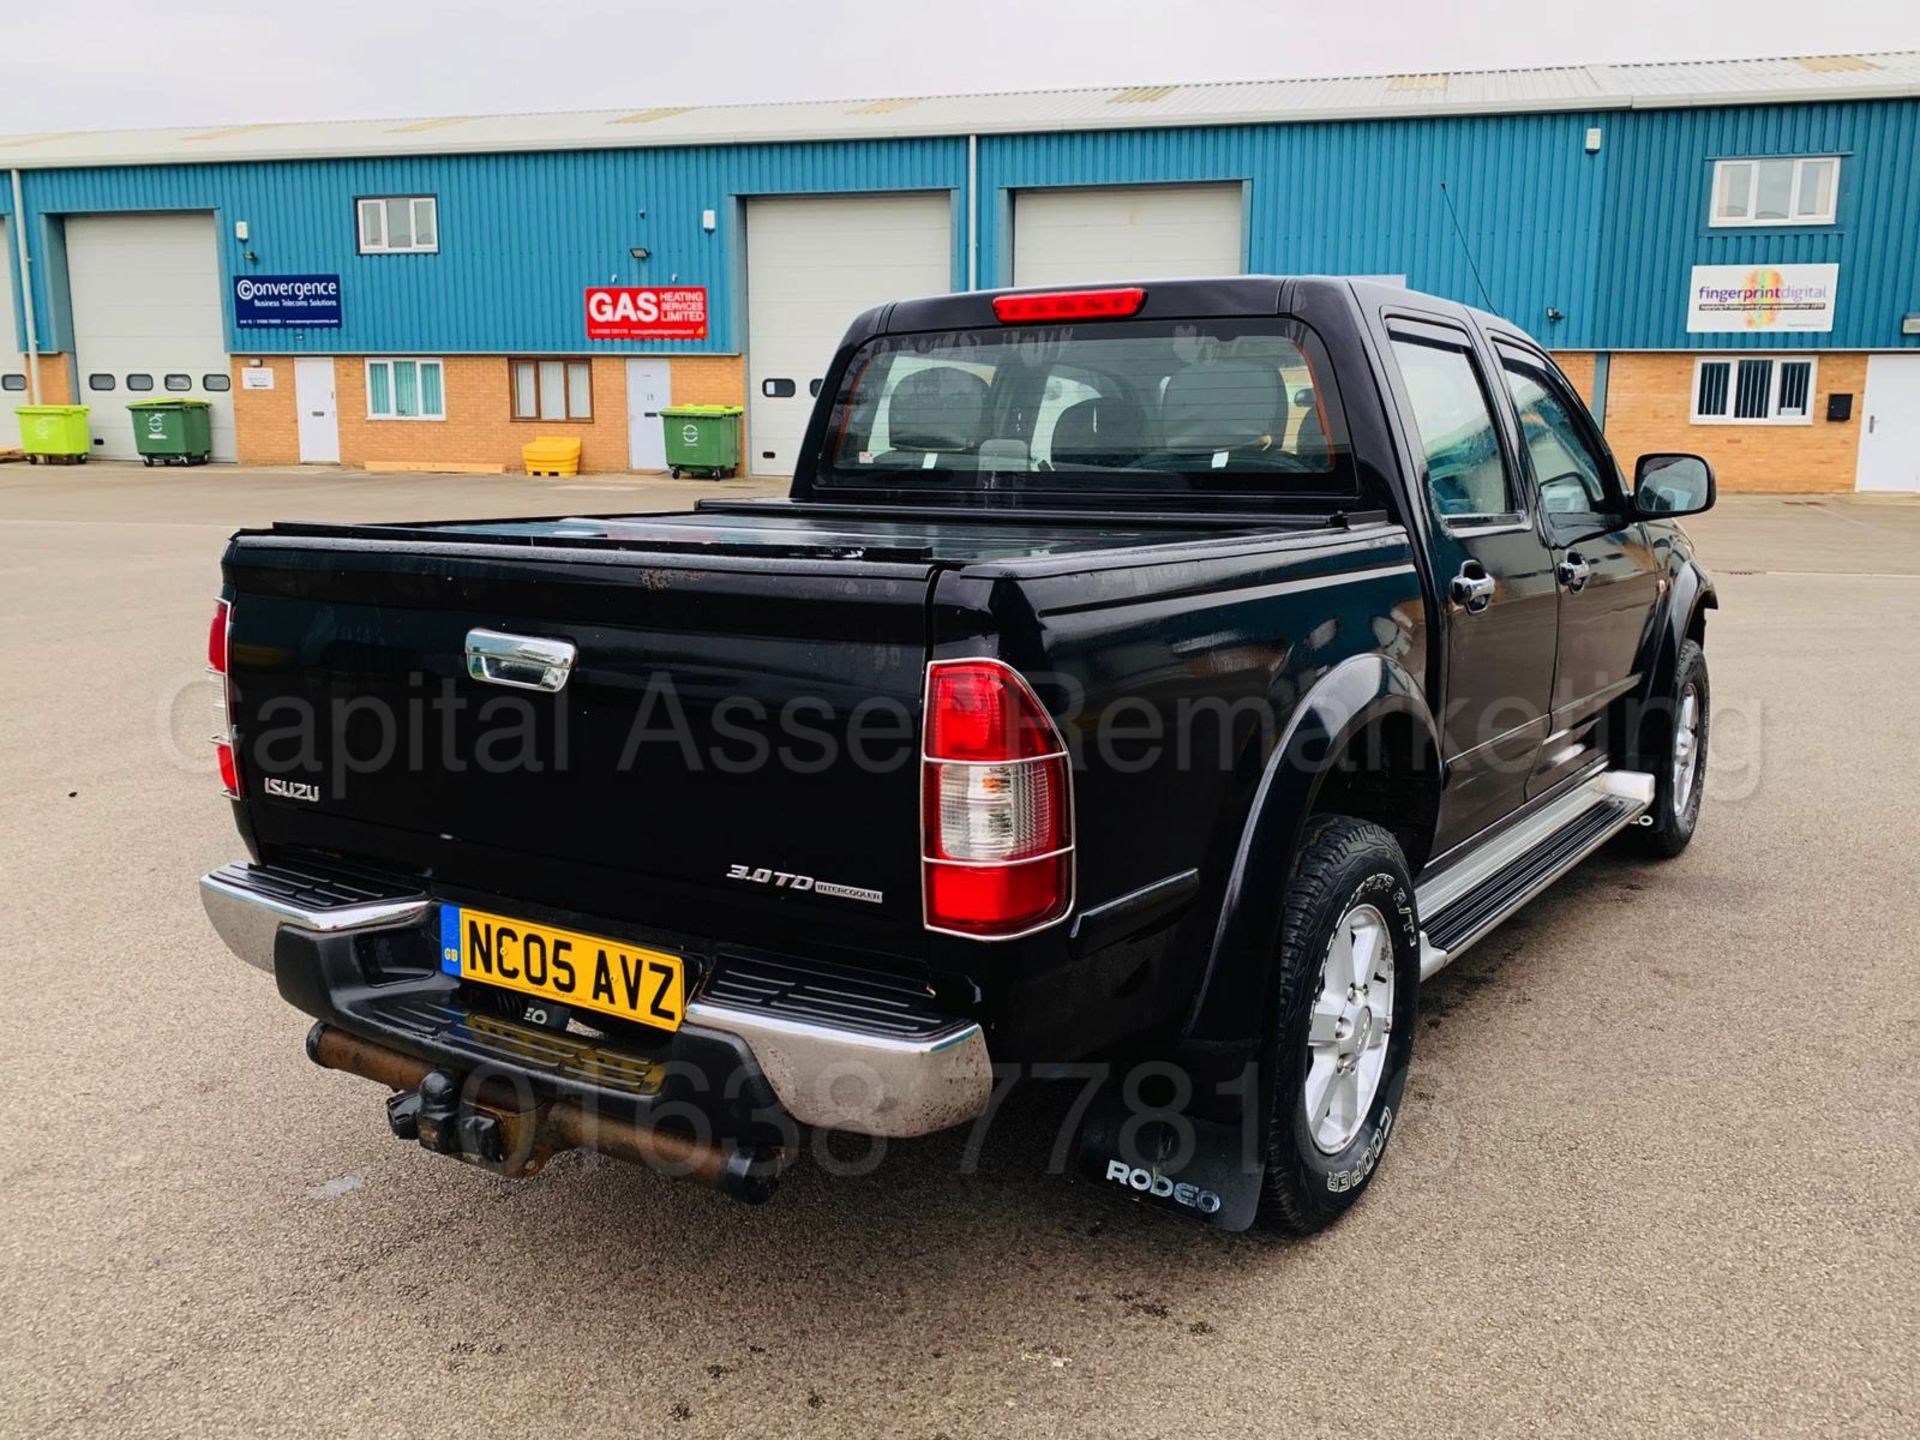 ISUZU RODEO DENVER *DOUBLE CAB PICK-UP* (2005) '3.0 TURBO DIESEL - 130 BHP' *LEATHER - A/C* (NO VAT) - Image 6 of 23